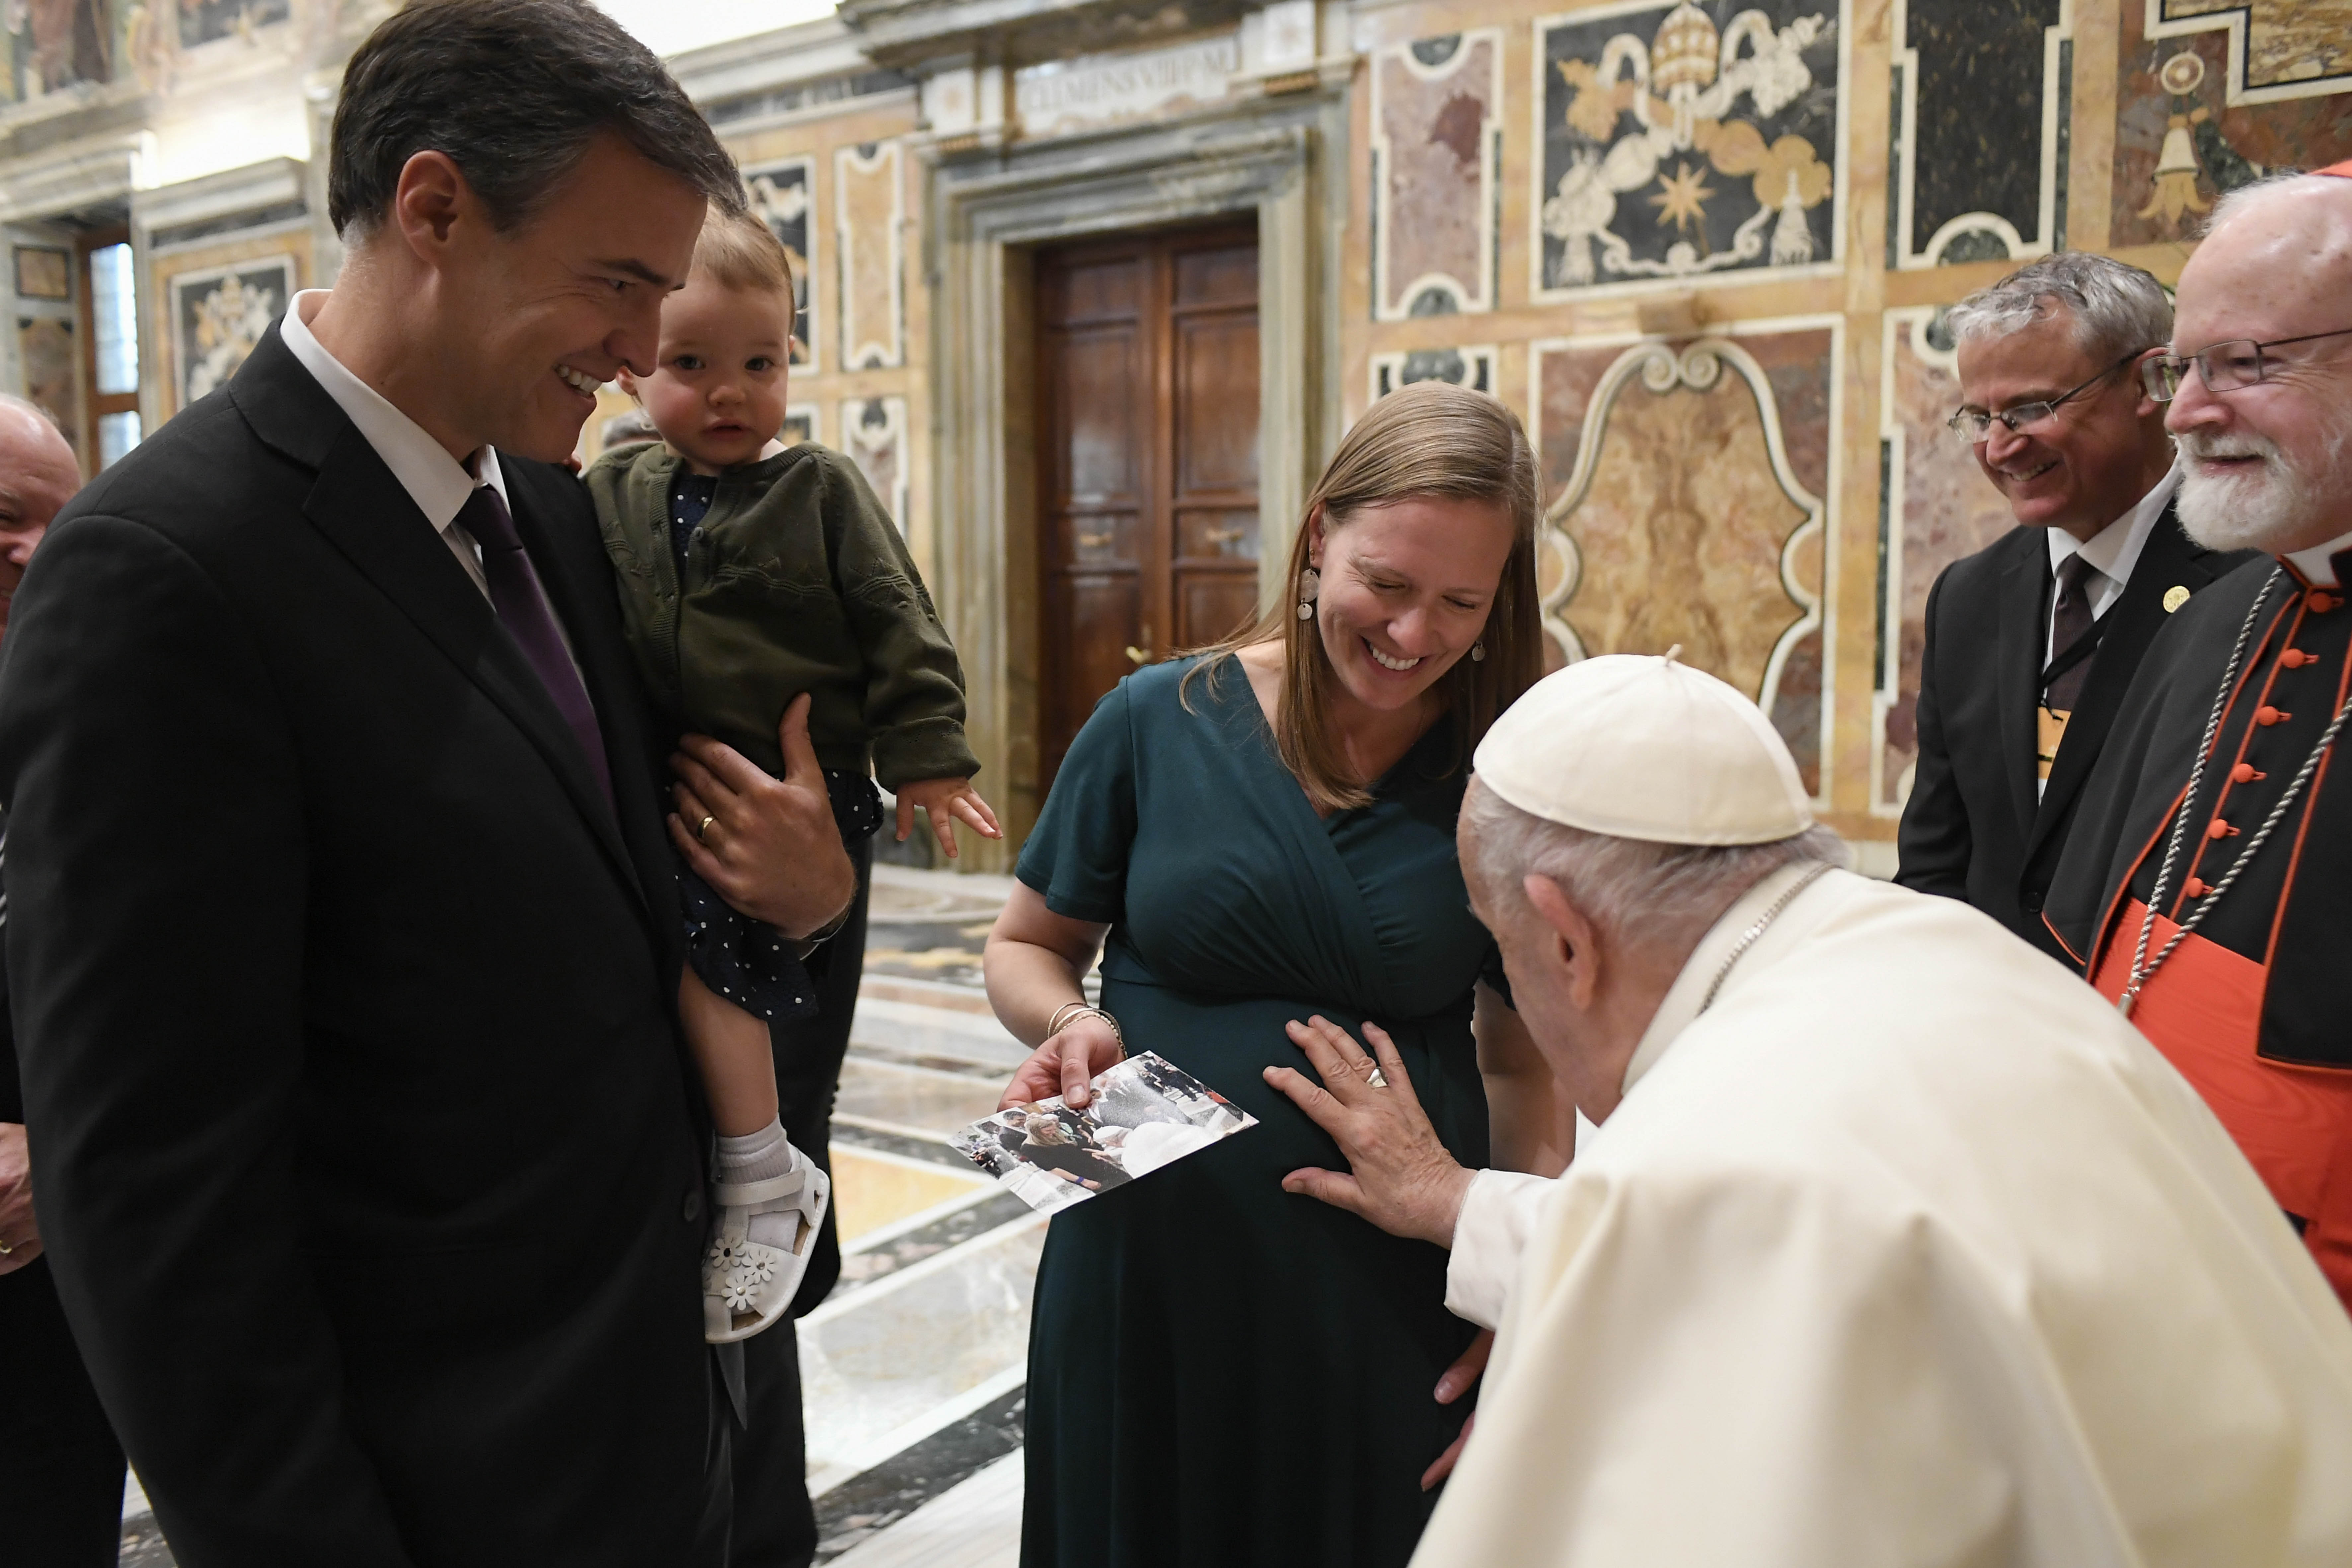 Pope Francis blesses a pregnant woman's child.